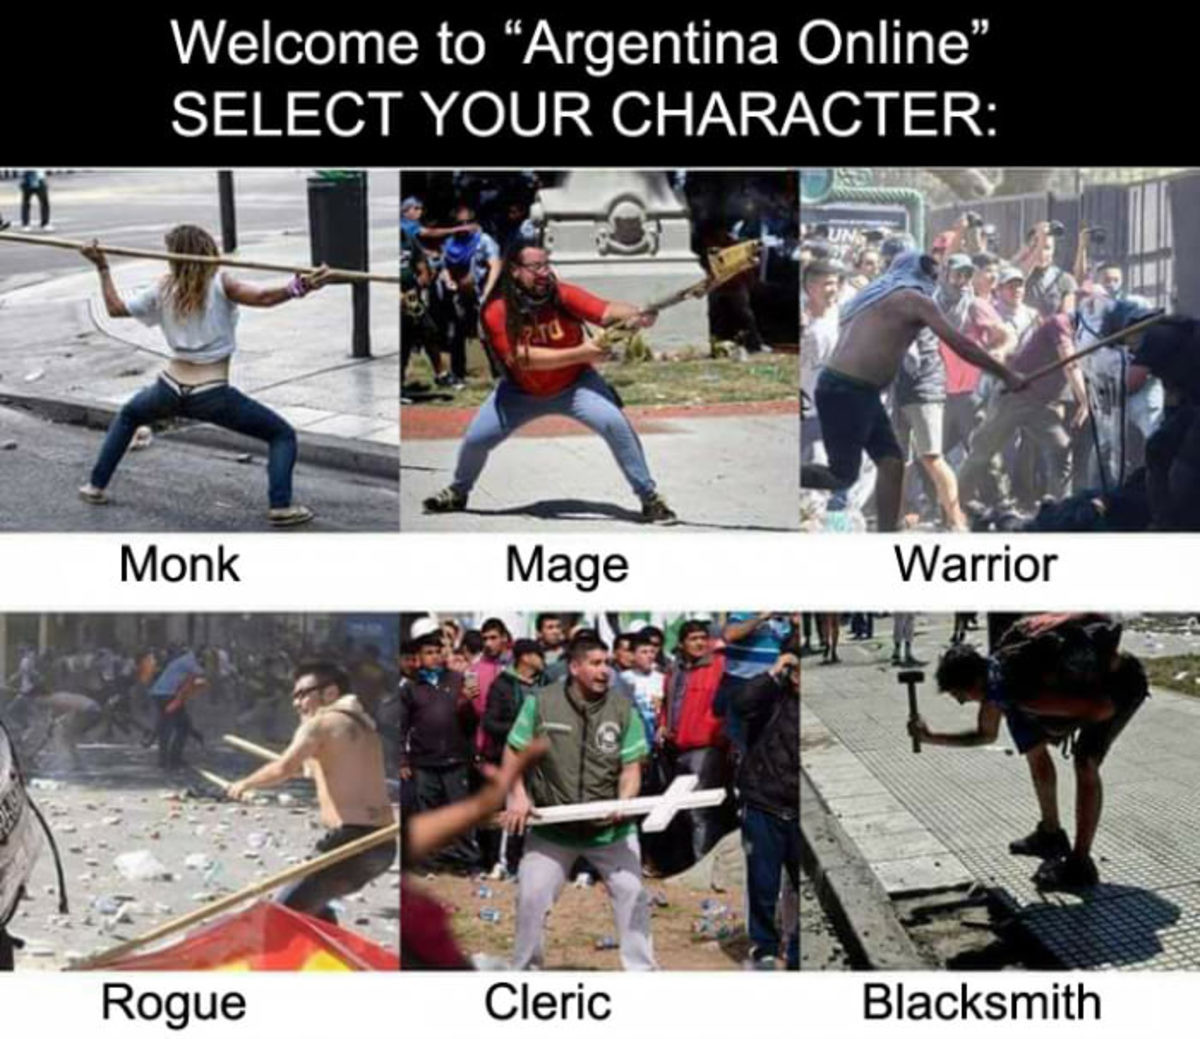 welcome to argentina online. . Welcome to "Argentina (C) nline" SELECT 1/' CYUR CHARACTER: